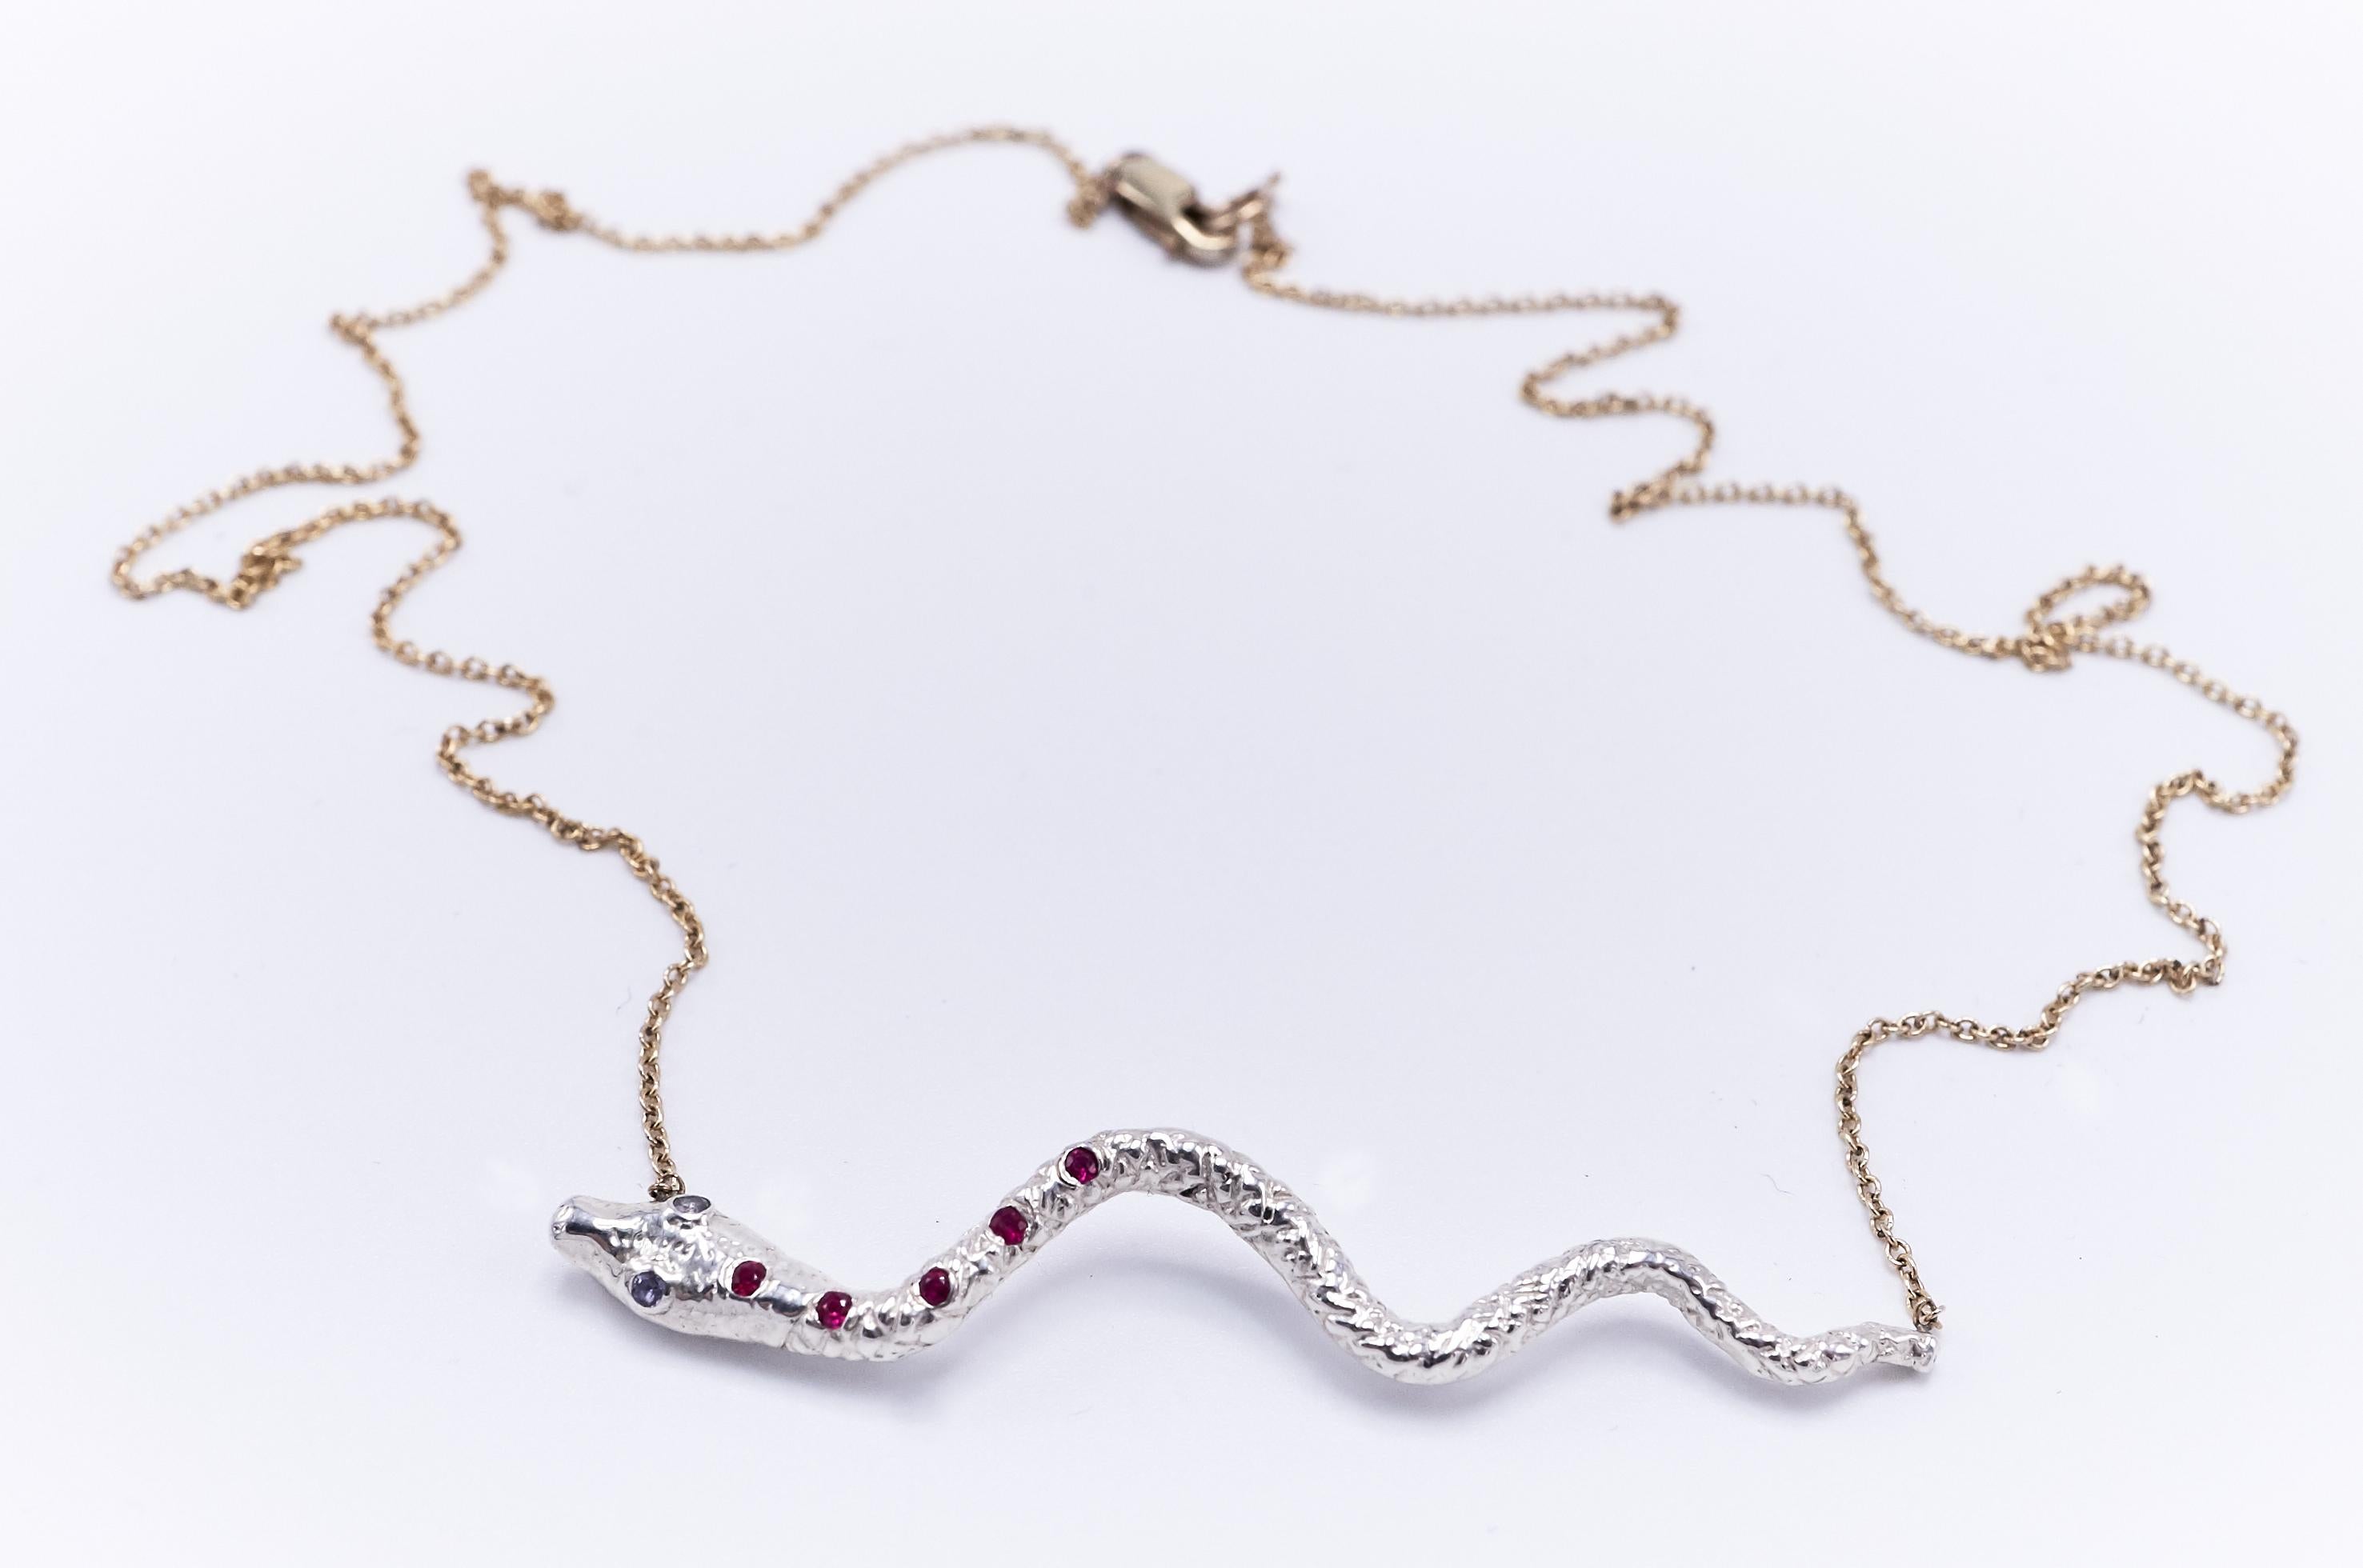 Contemporary Ruby Iolite Snake Necklace Silver Gold Filled Chain J Dauphin For Sale